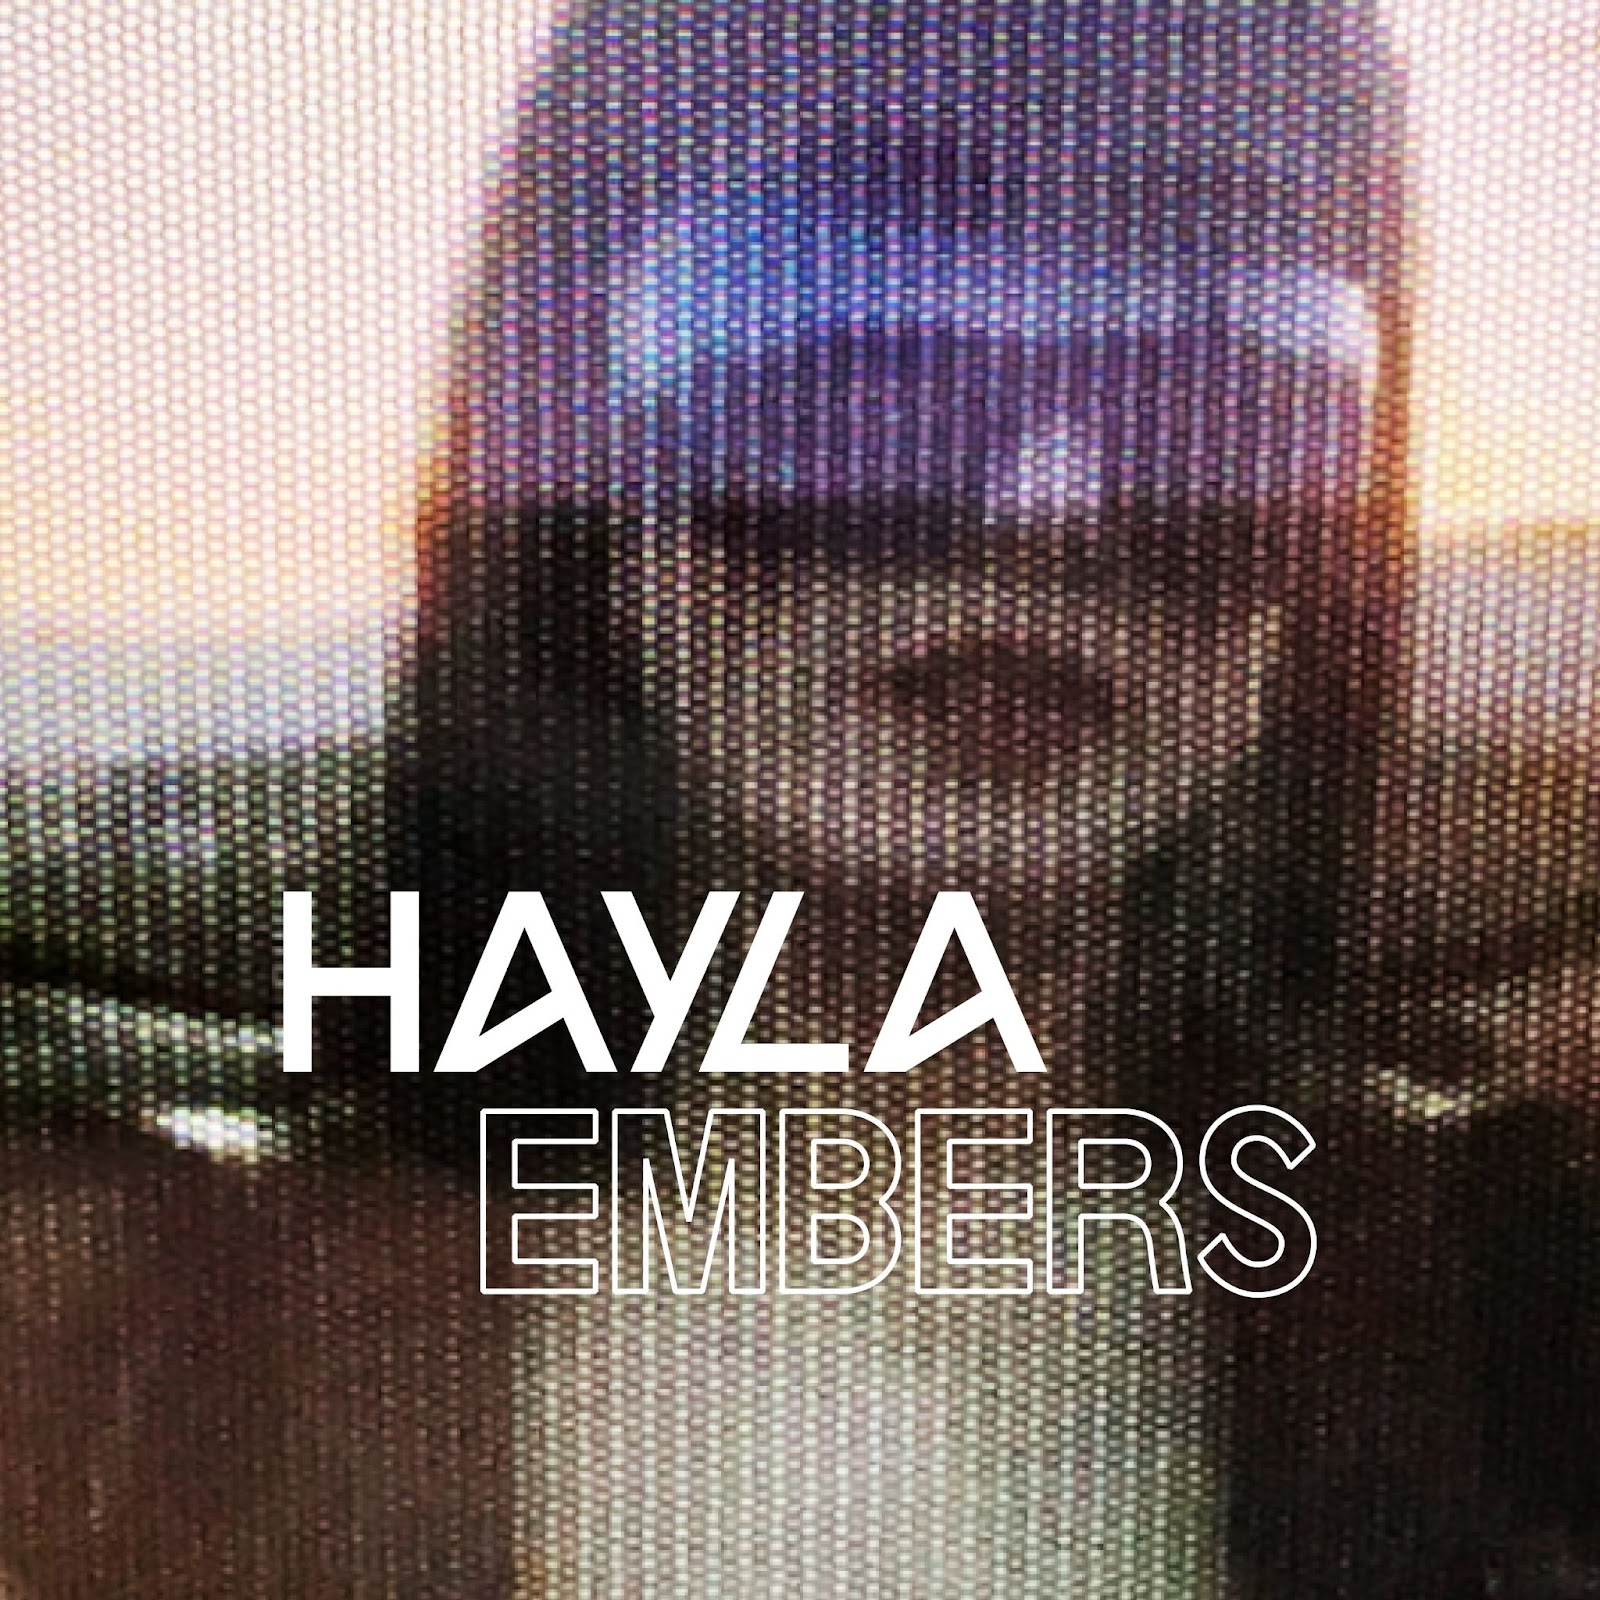 Dance Music Sensation, Singer & Songwriter HAYLA Presents New Single "Embers" Today, April 19